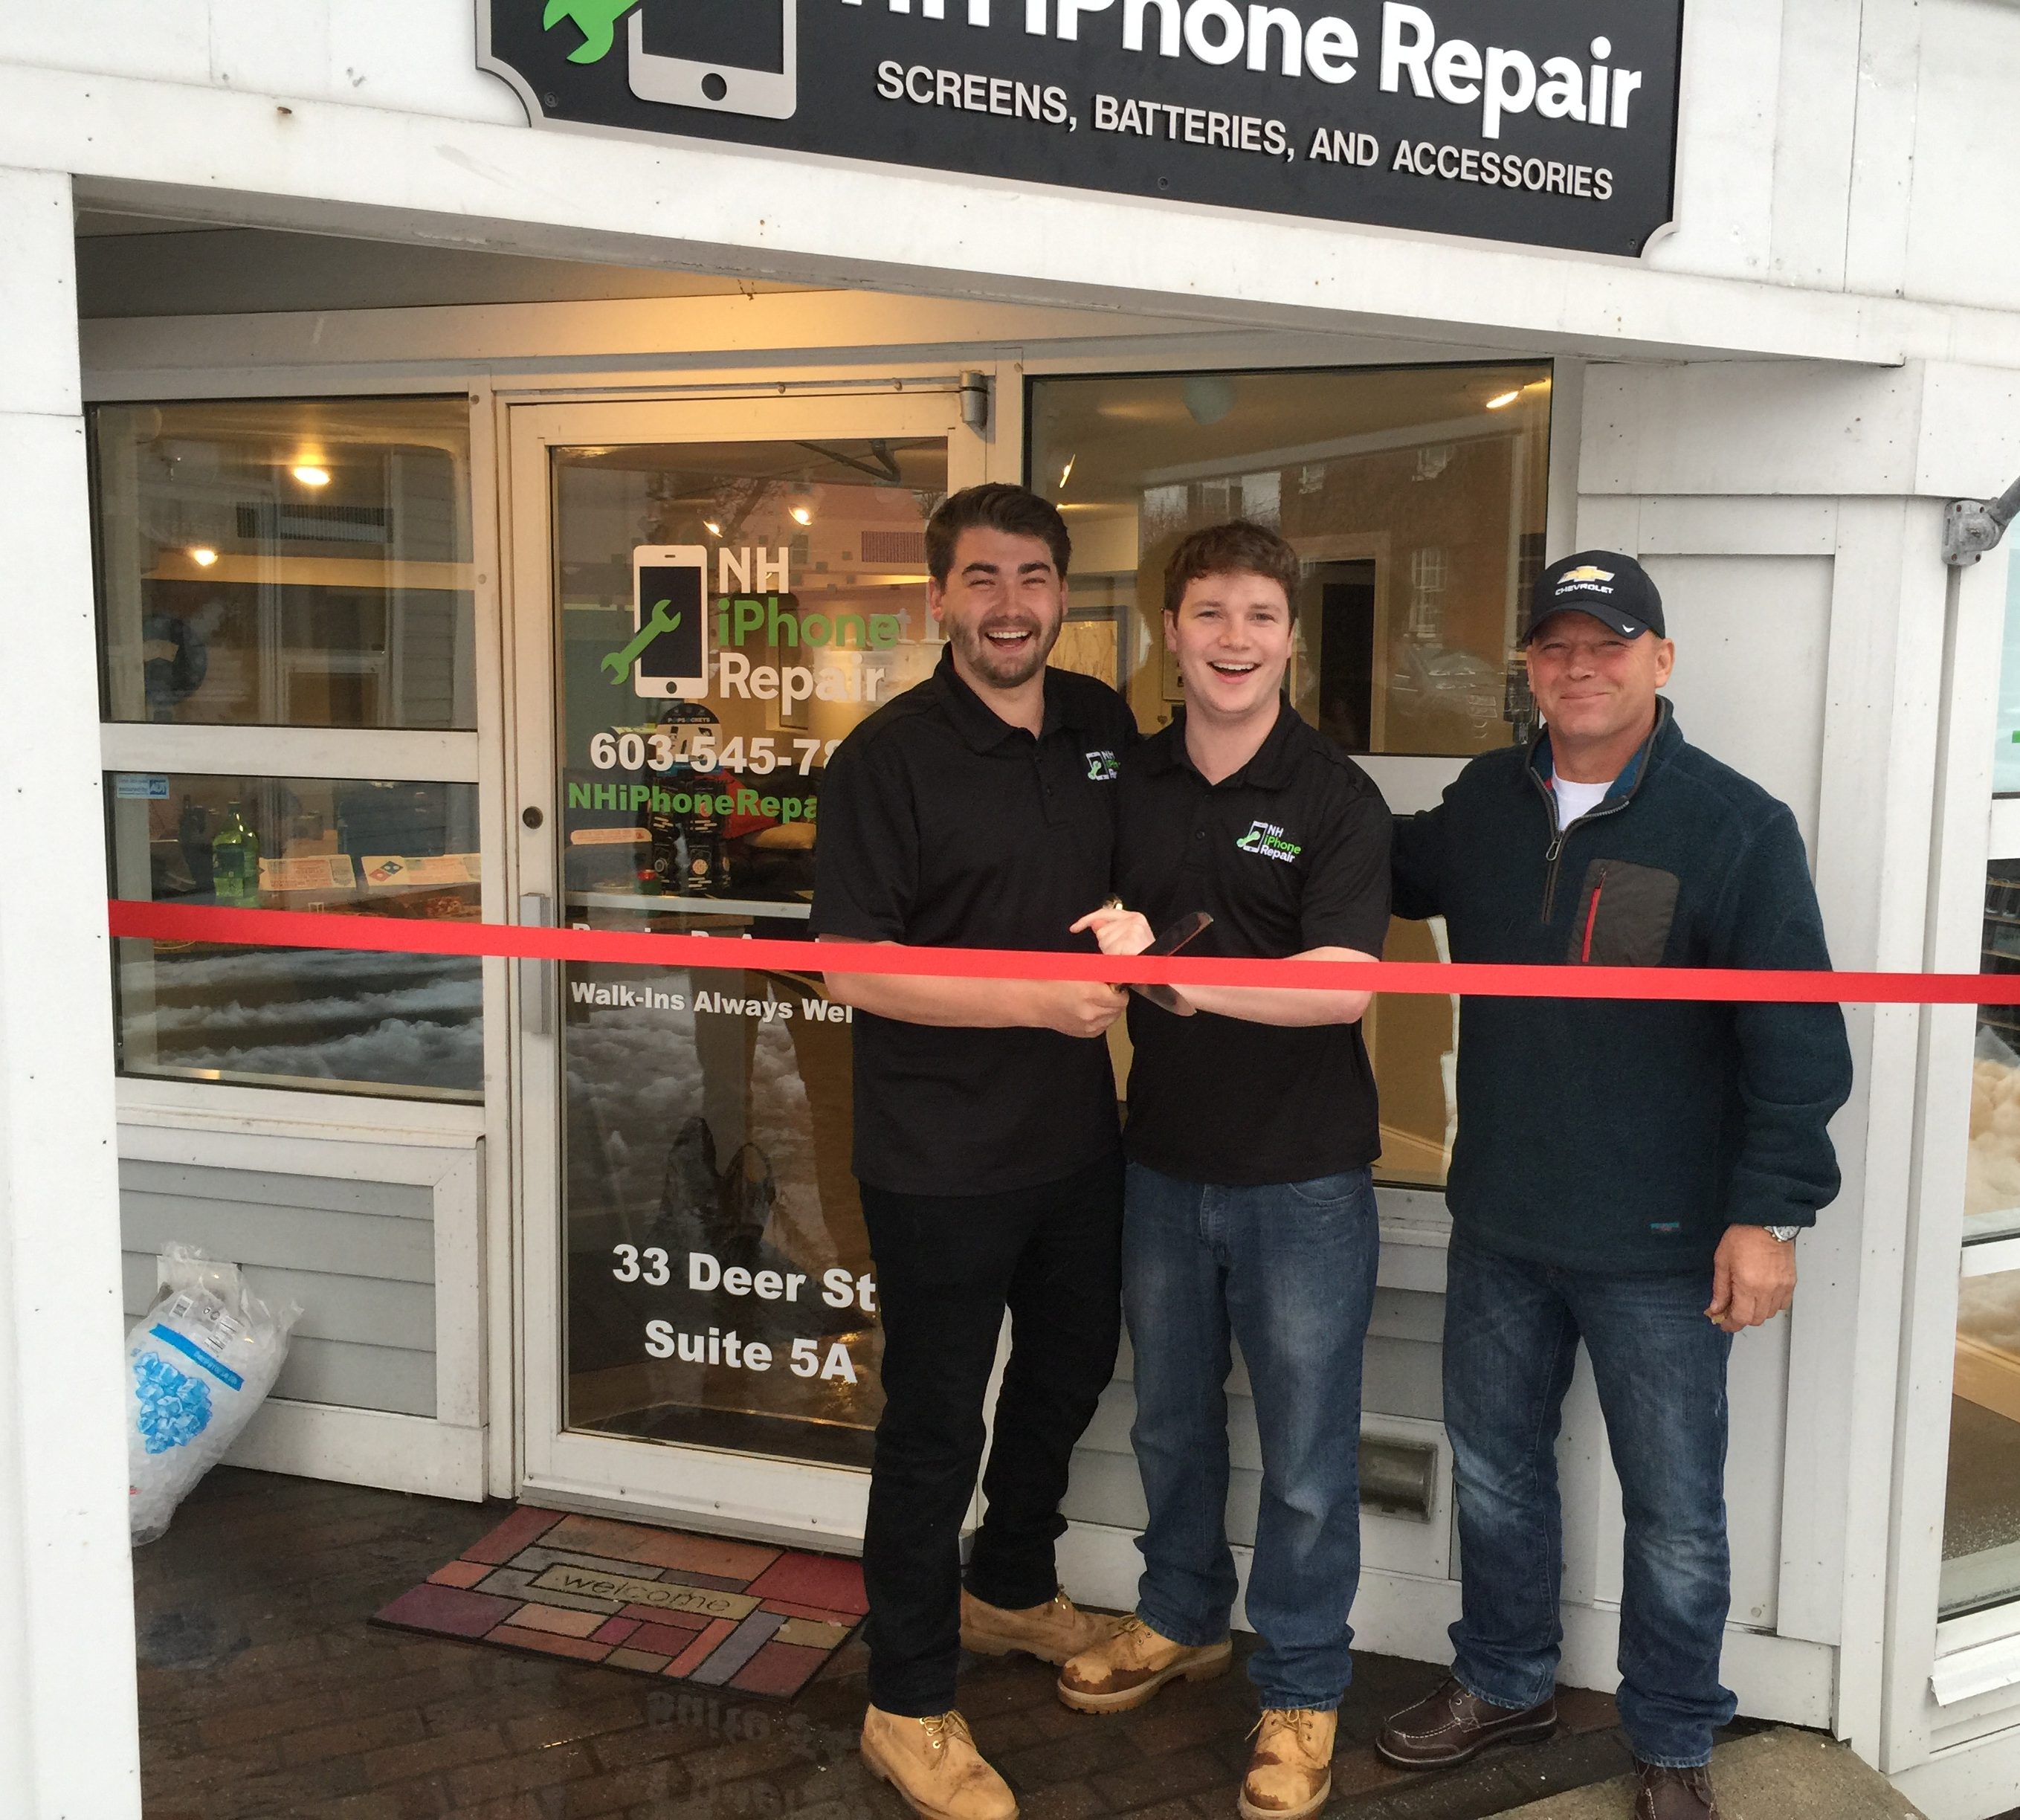 Grand opening of NH iPhone Repair. NH iPhone Repair owners cutting the red ribbon in front of the door